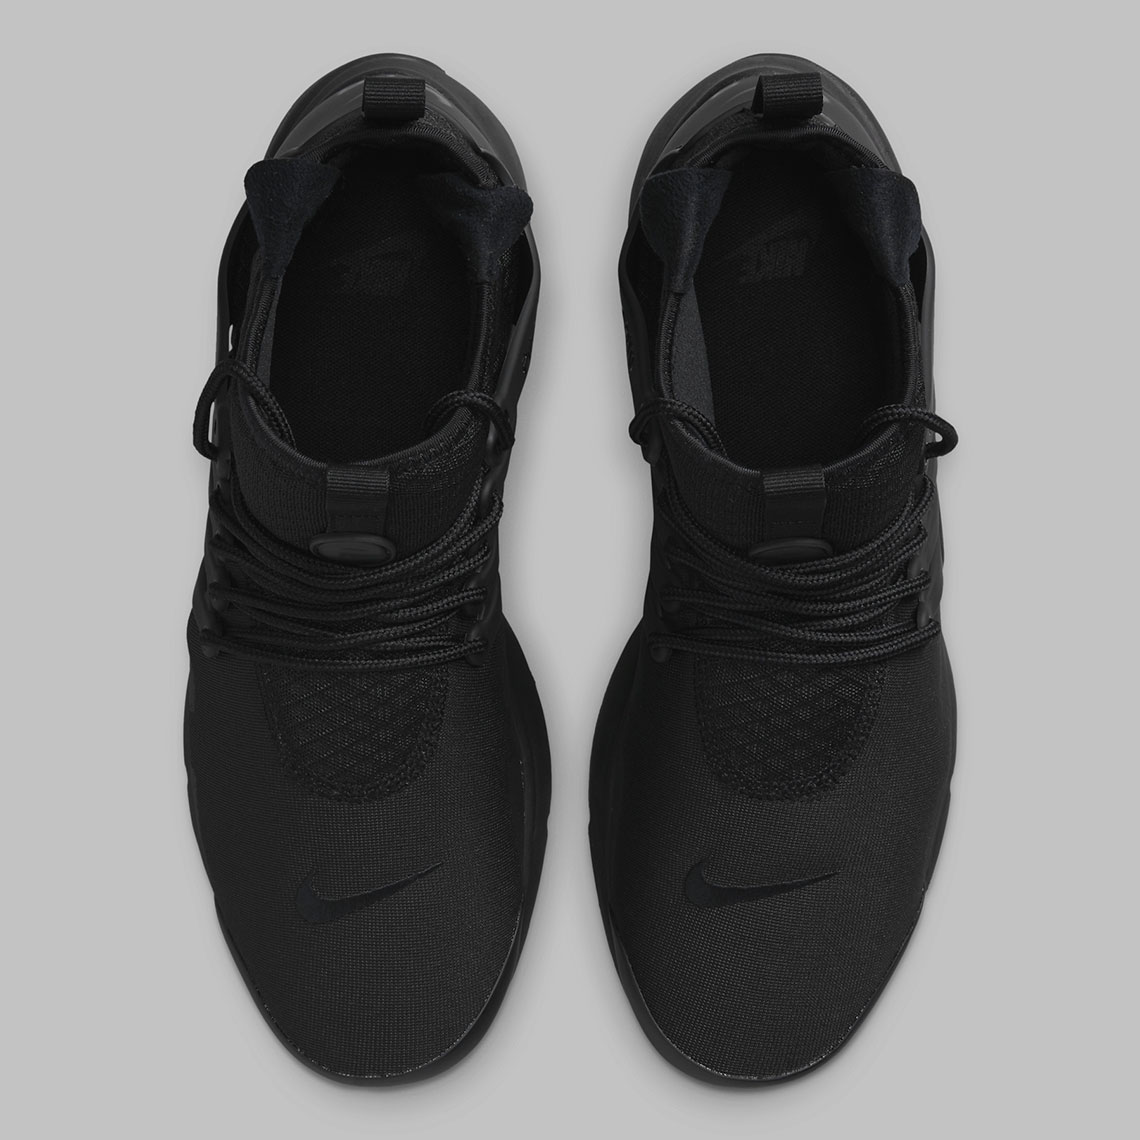 Nike Shorts & Her Go-To Sneakers Mid Utility Triple Black Dc8751 003 3